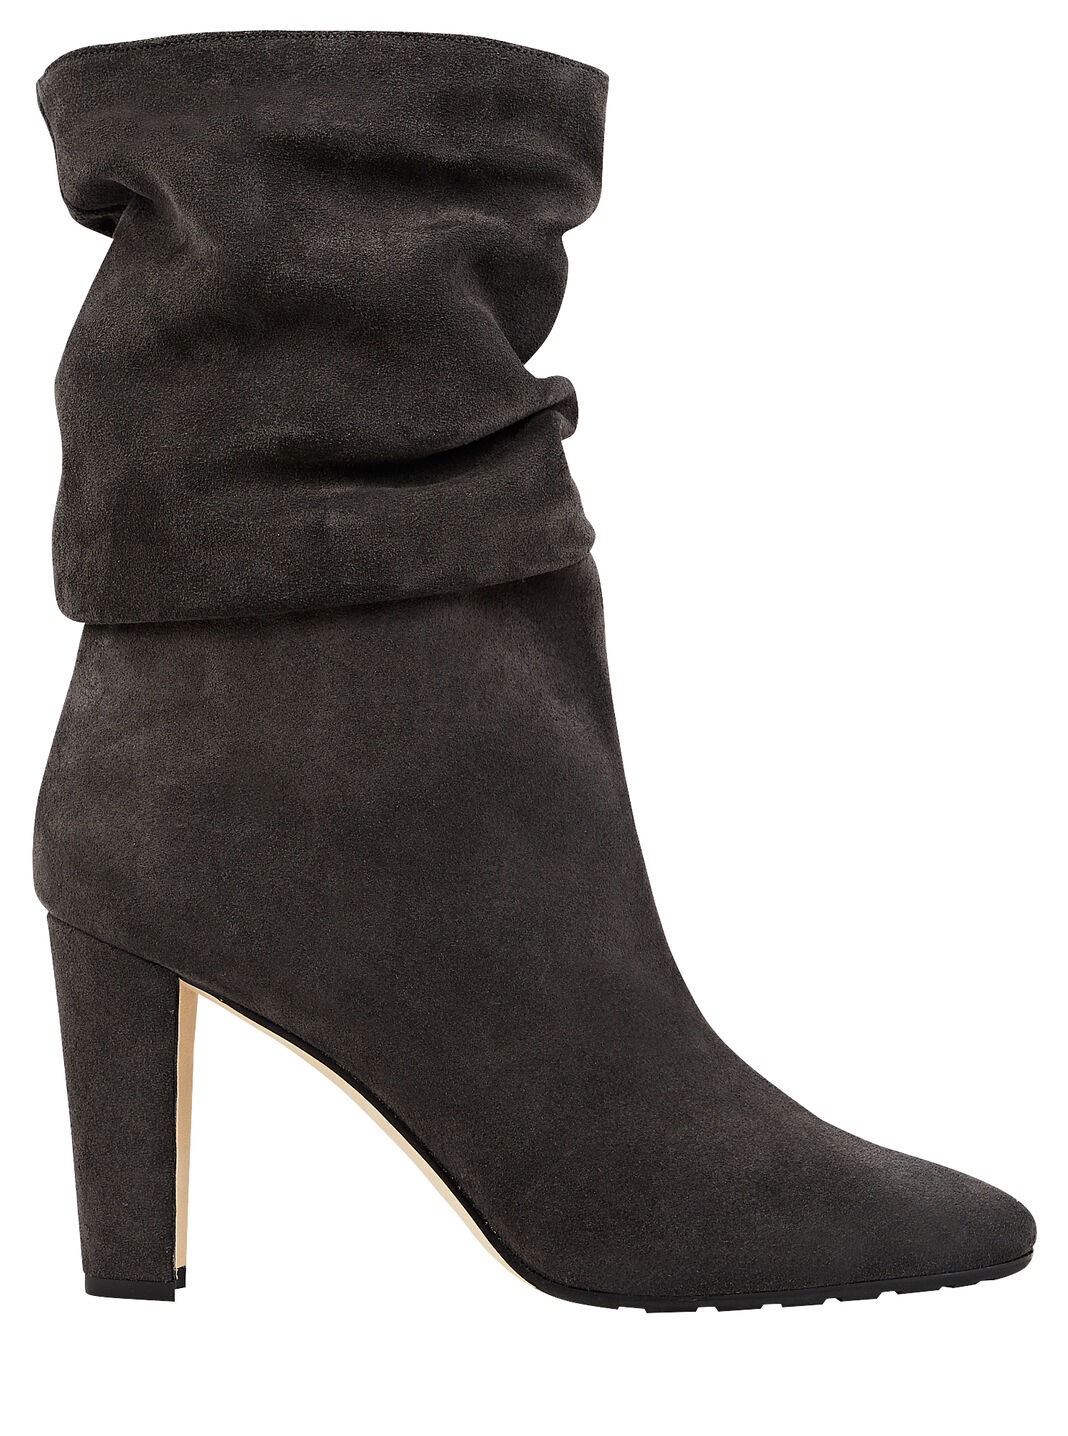 Calasso 90 Suede Slouch Boots